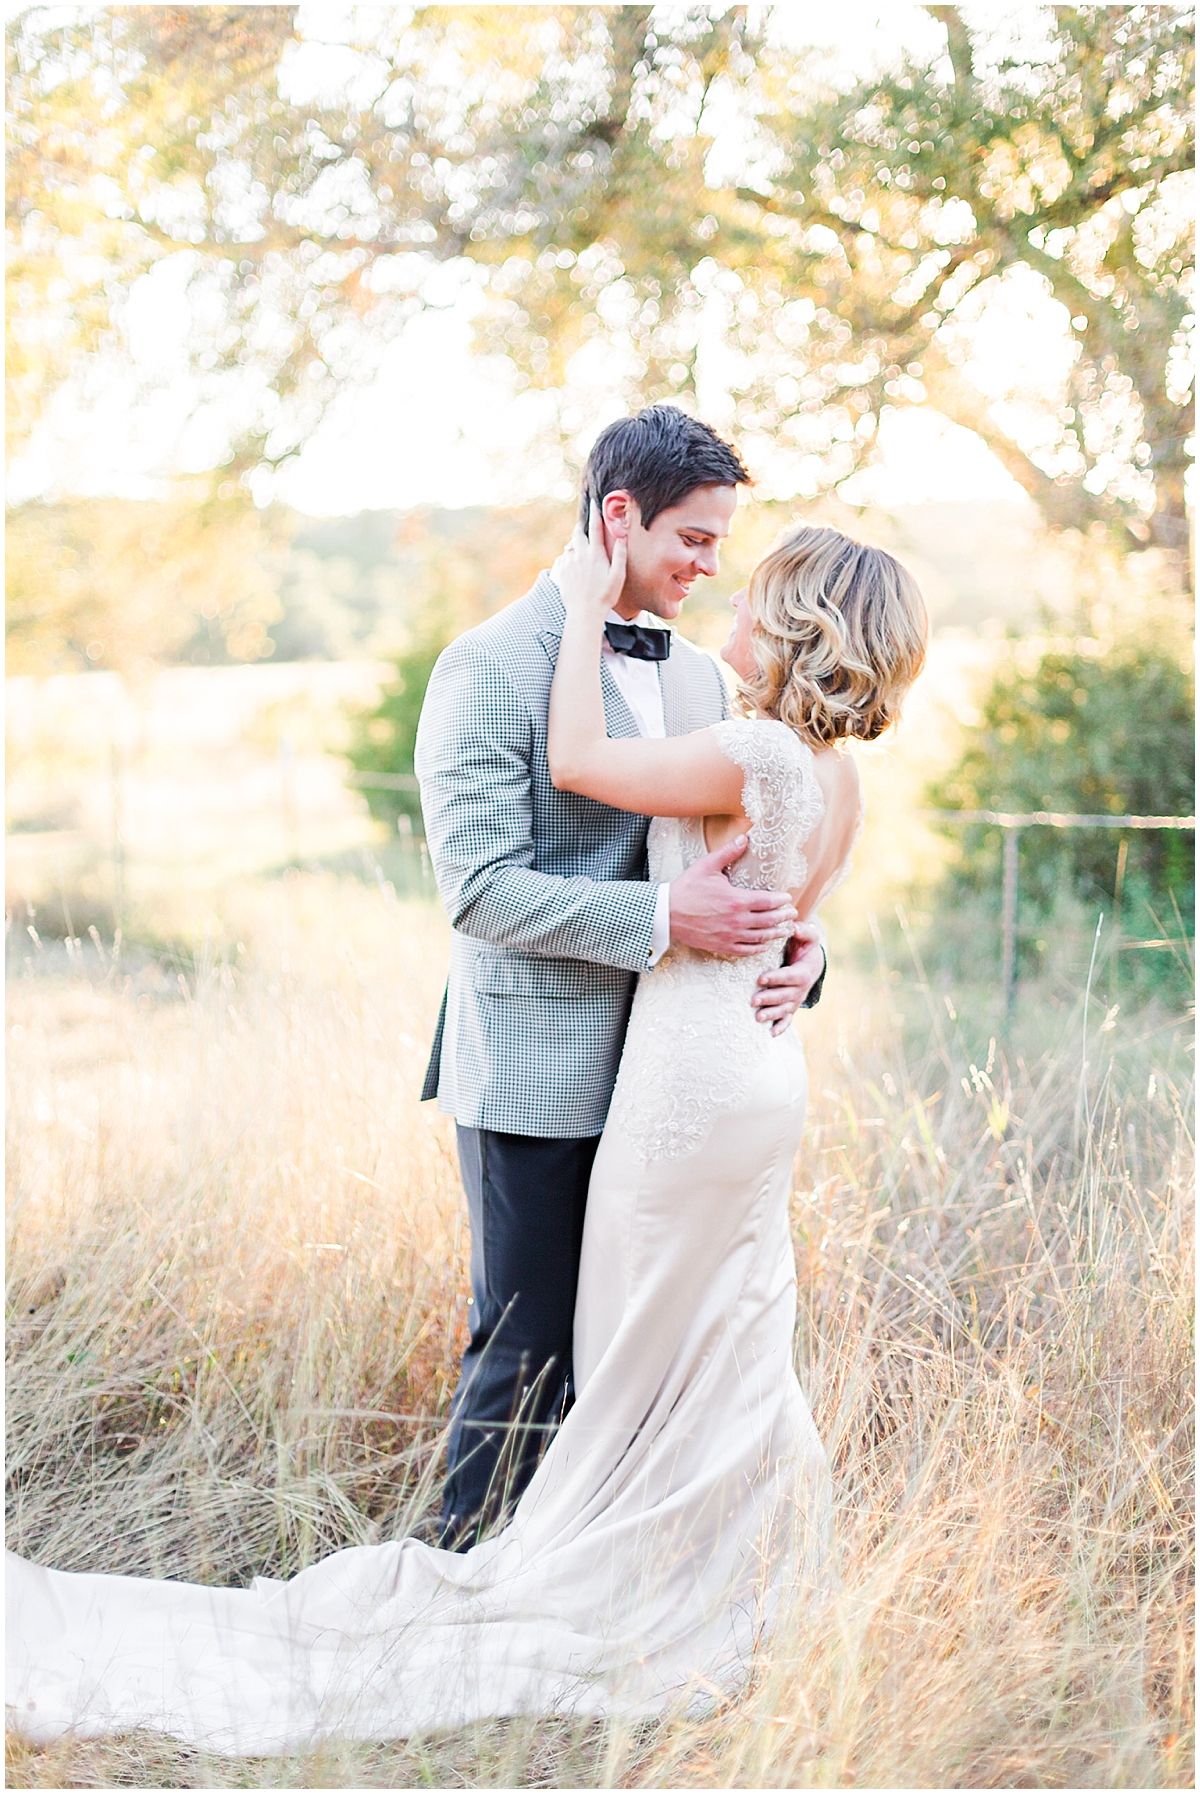 a-classic-modern-black-and-white-wedding-with-gold-accents-inspirational-shoot-at-pecan-springs-ranch-by-allison-jeffers-wedding-photography-dripping-springs-wedding-photographer_0075